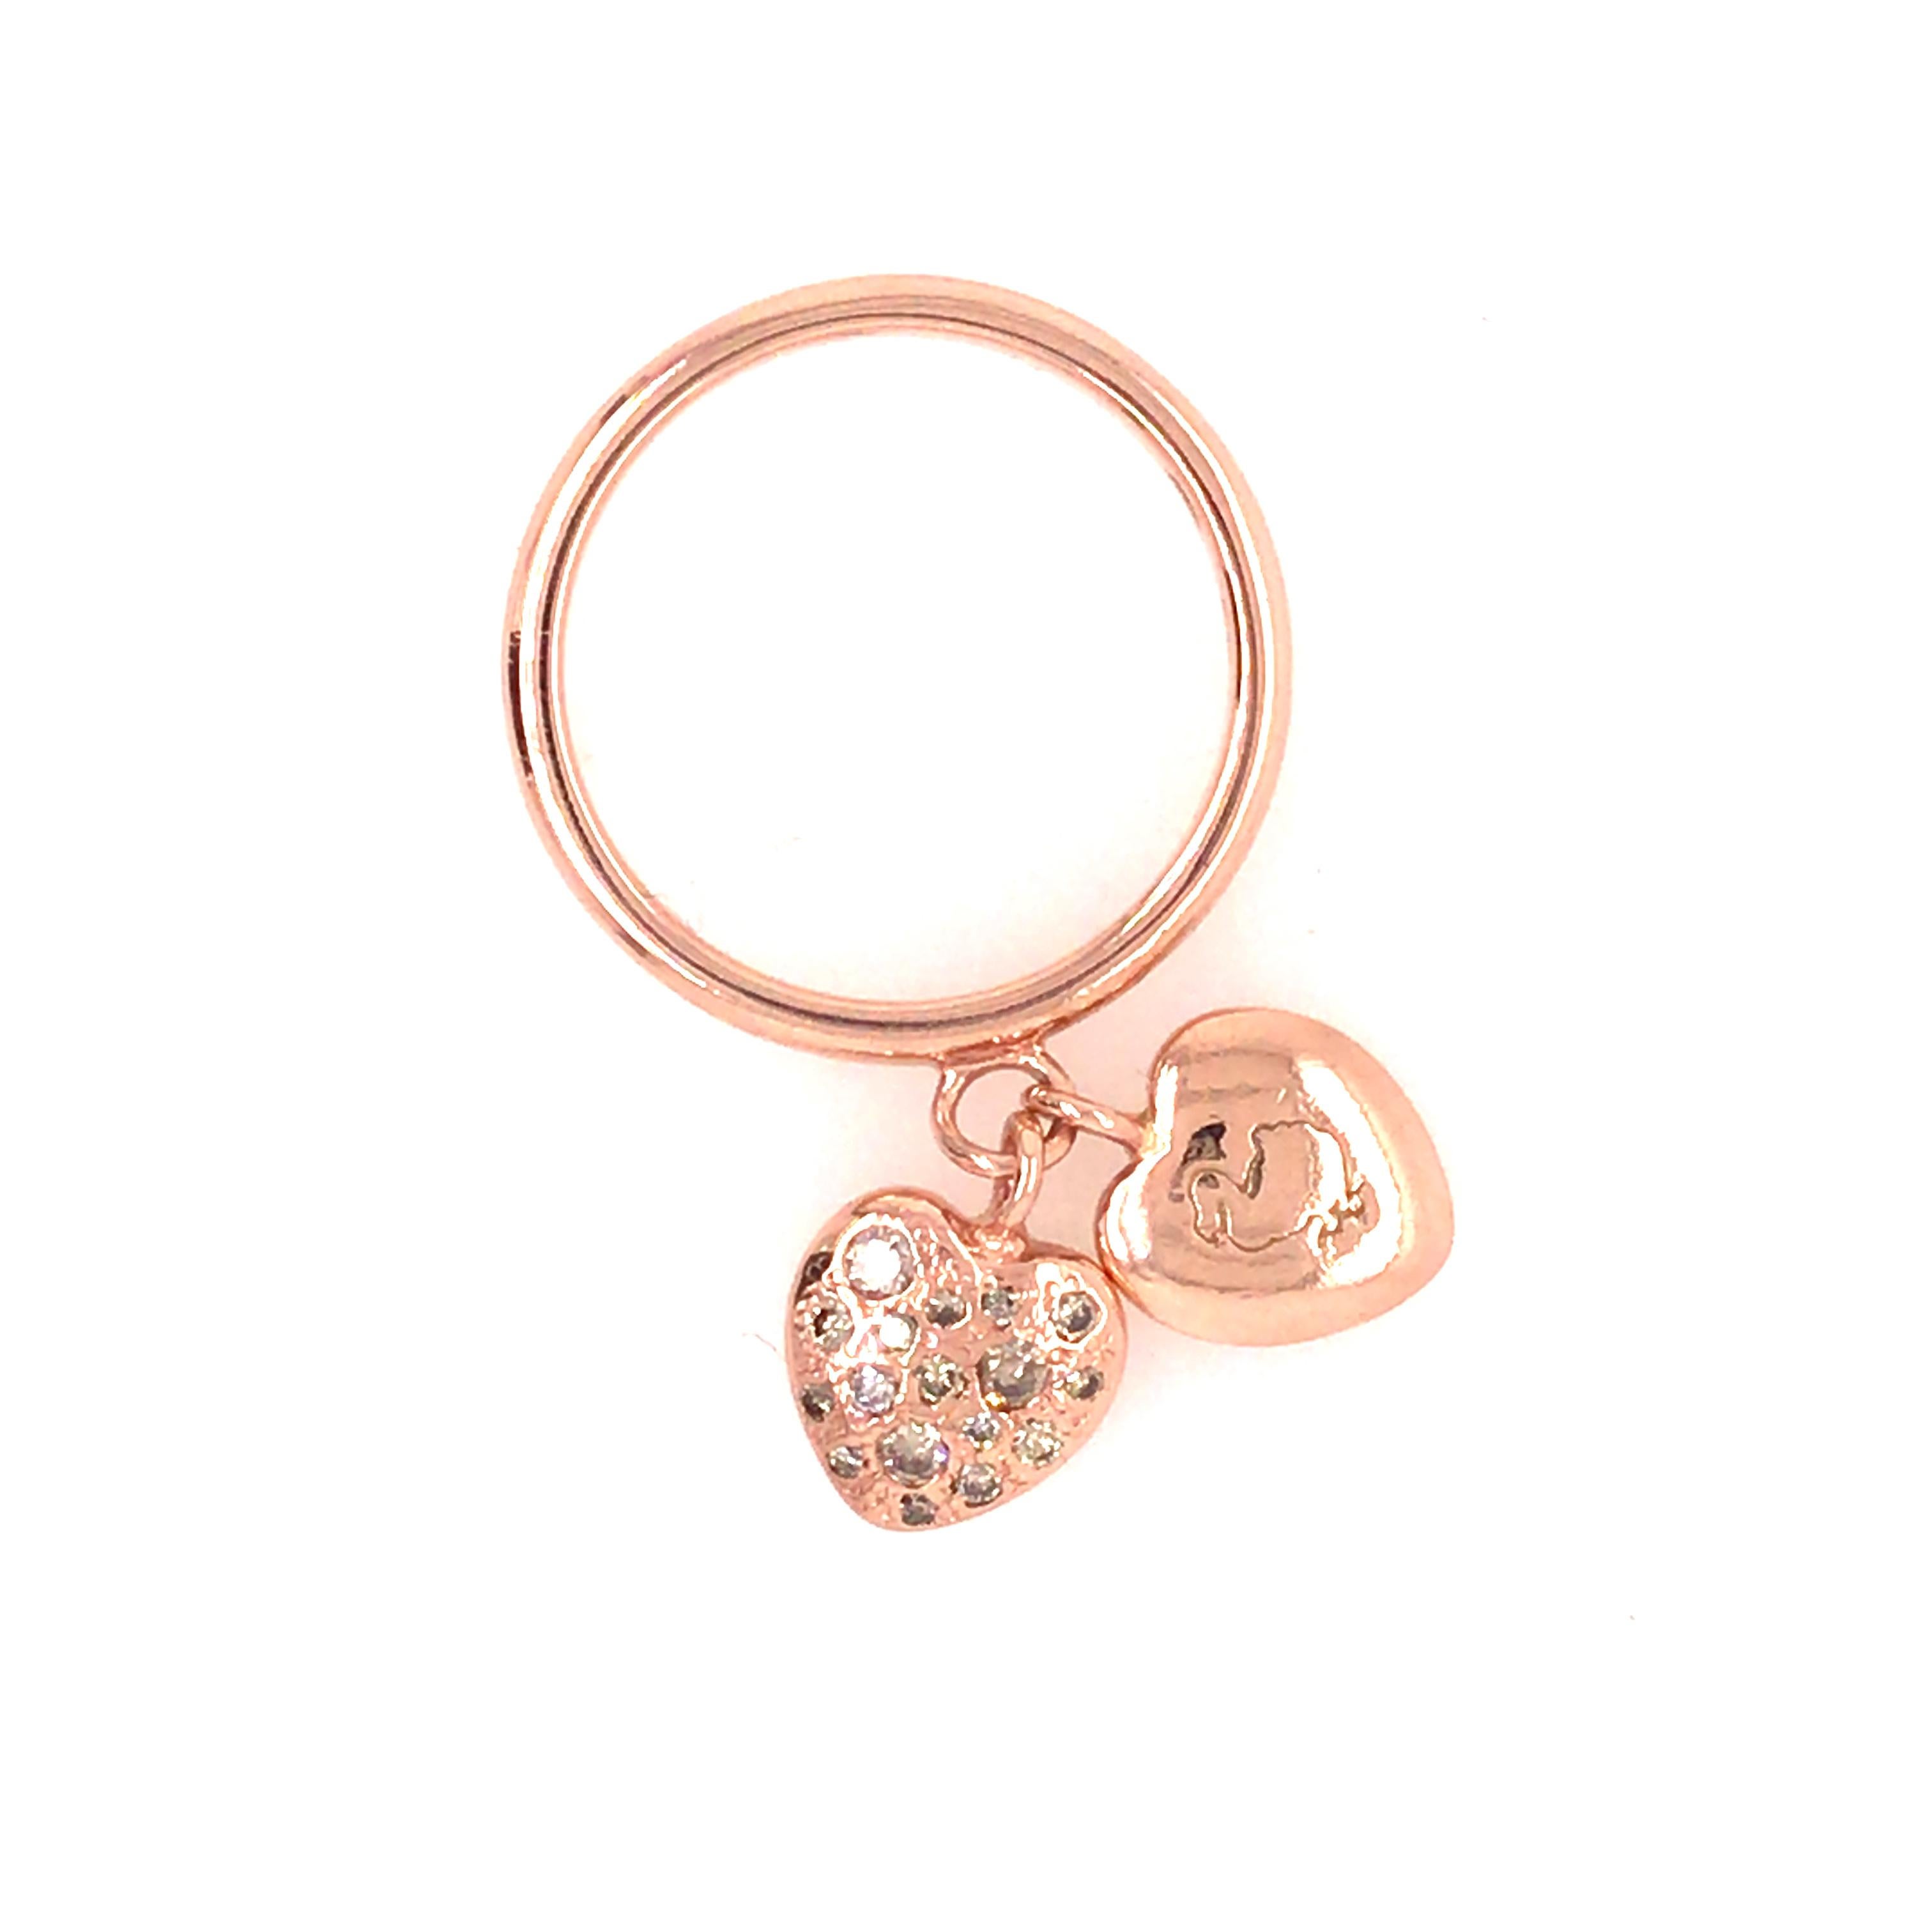 Dodo Pomellato Pave Heart Charms Ring in 9K Rose Gold.  (18) Round Brilliant Cut Diamonds weighing 0.18 carat total weight, J-K in color and SI-I1 in clarity are expertly pave set in one heart charm.  Ring size 6 3/4, 4.82 grams.  
Inscribed: 375,